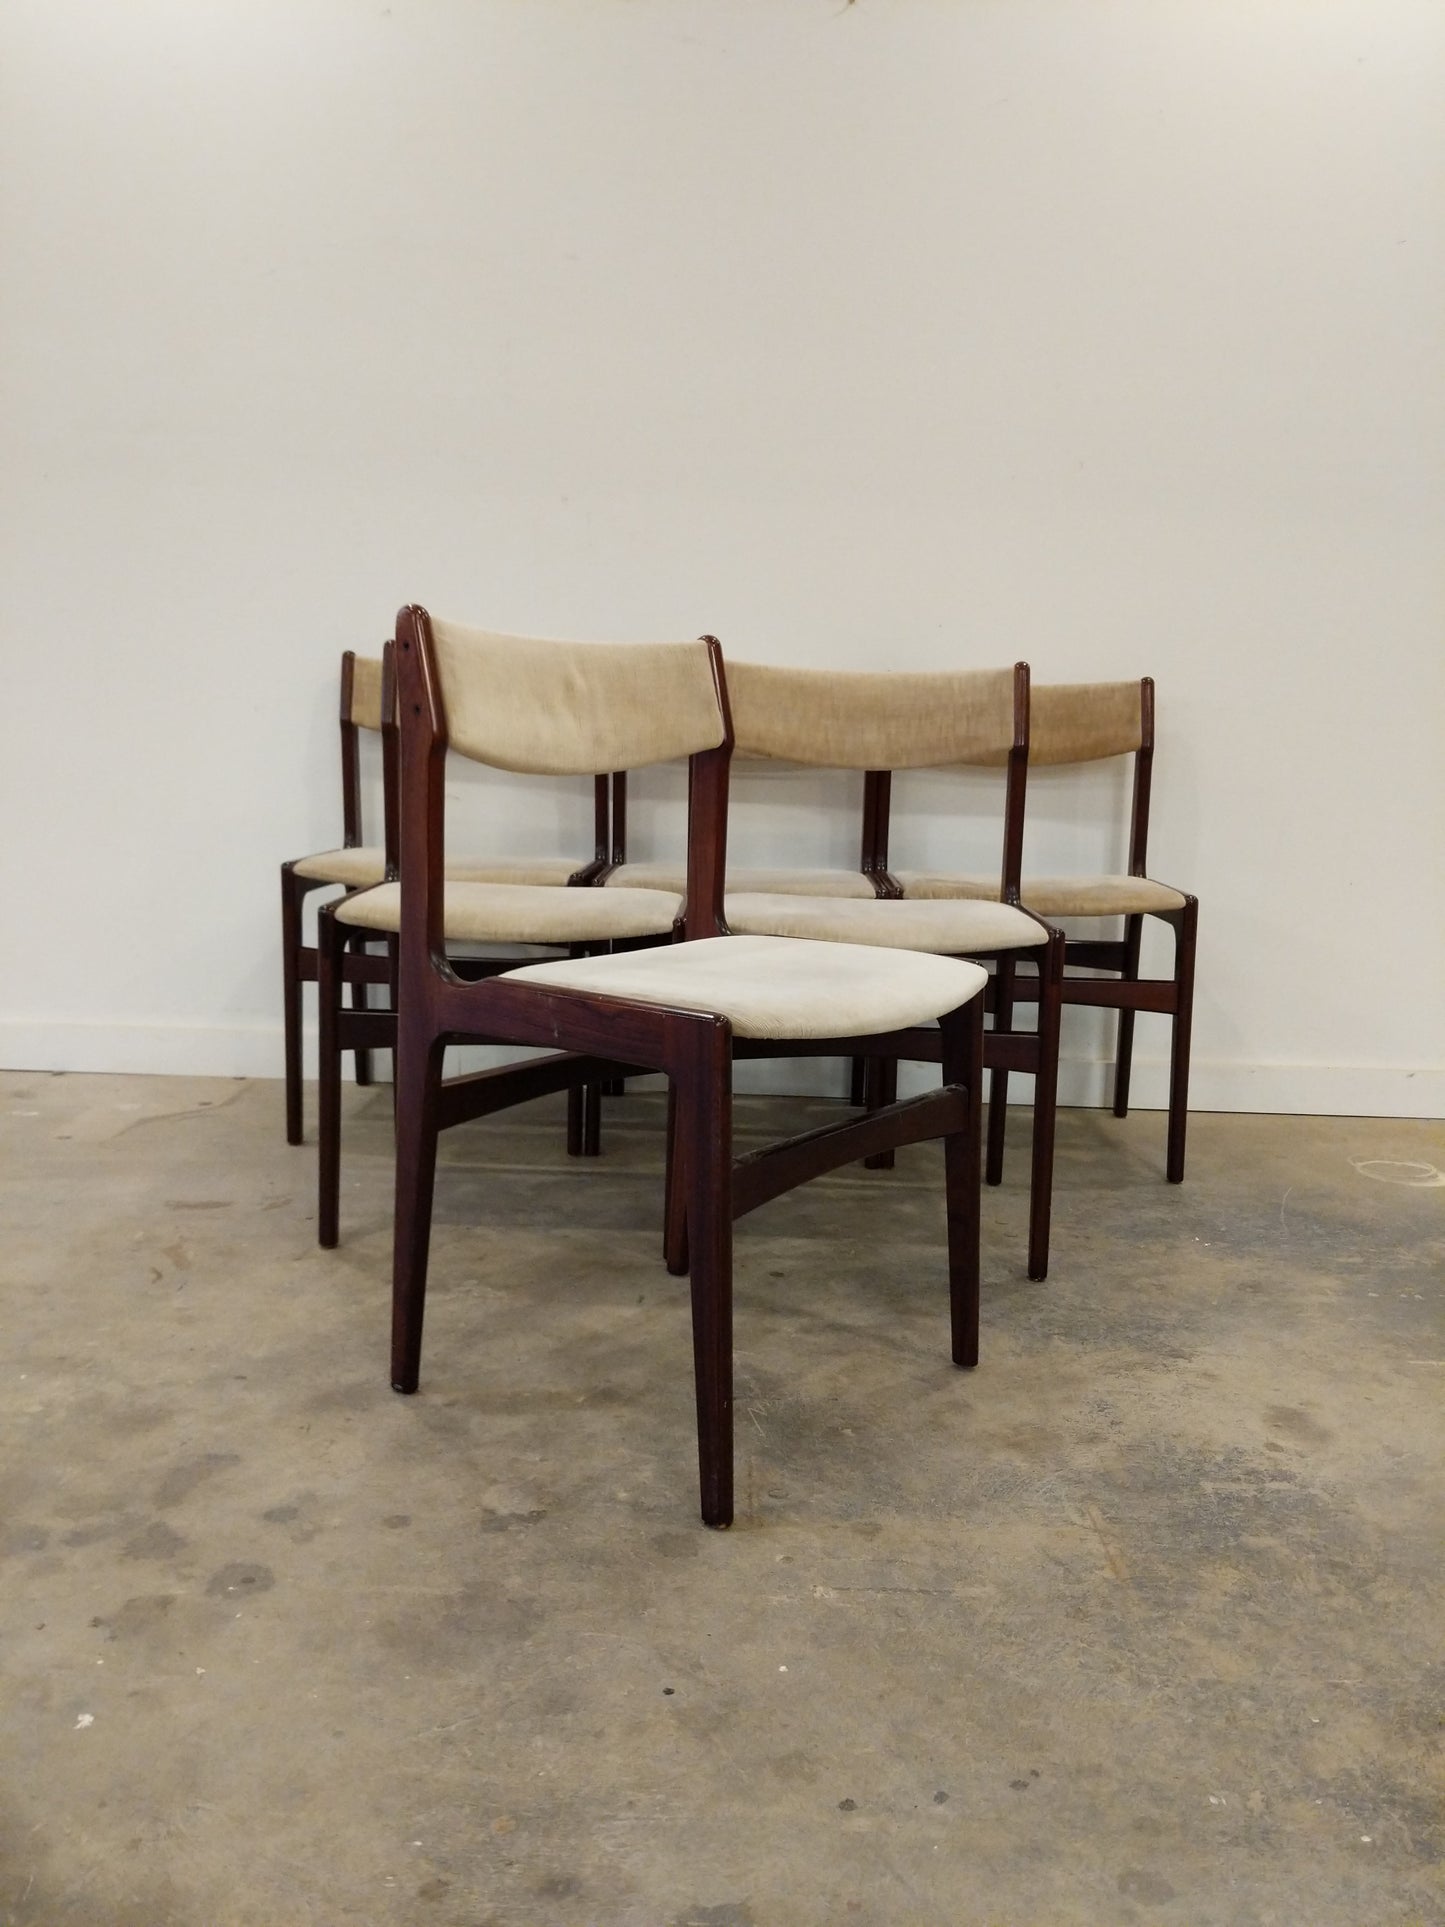 Set of 6 Vintage Danish Modern Dining Chairs